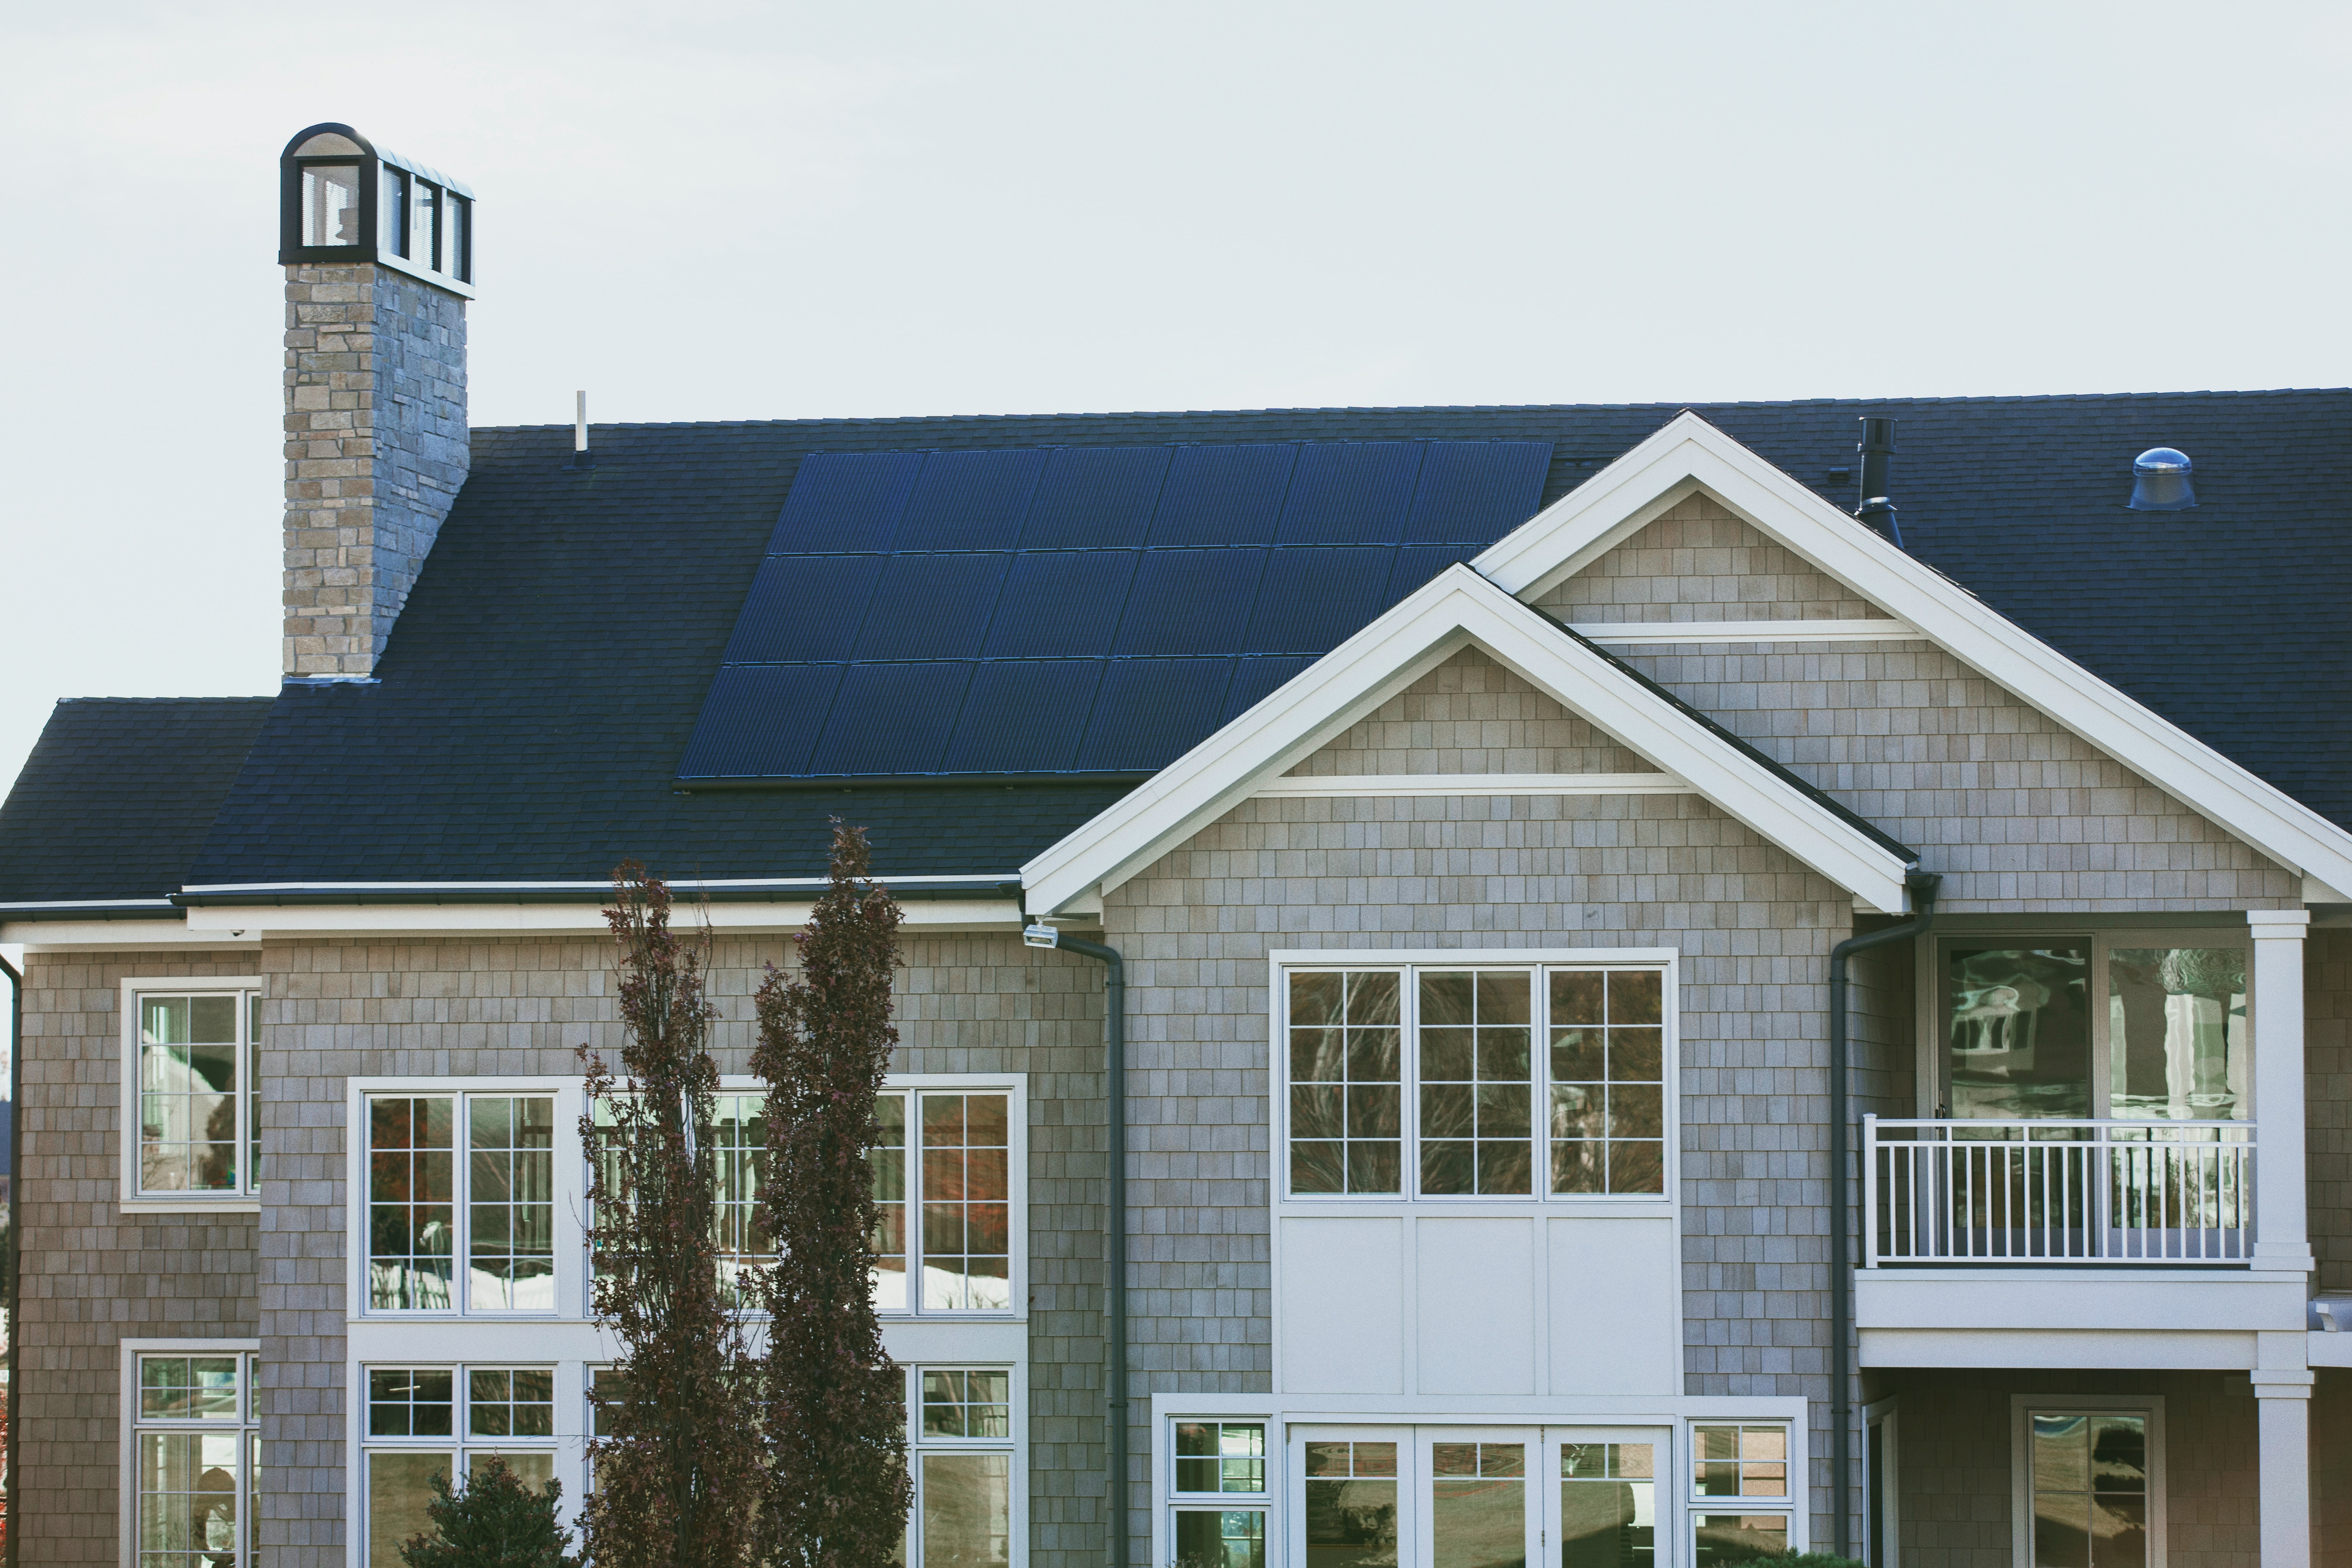 House For SALE? Your Solar Panels Are Worth GOLD